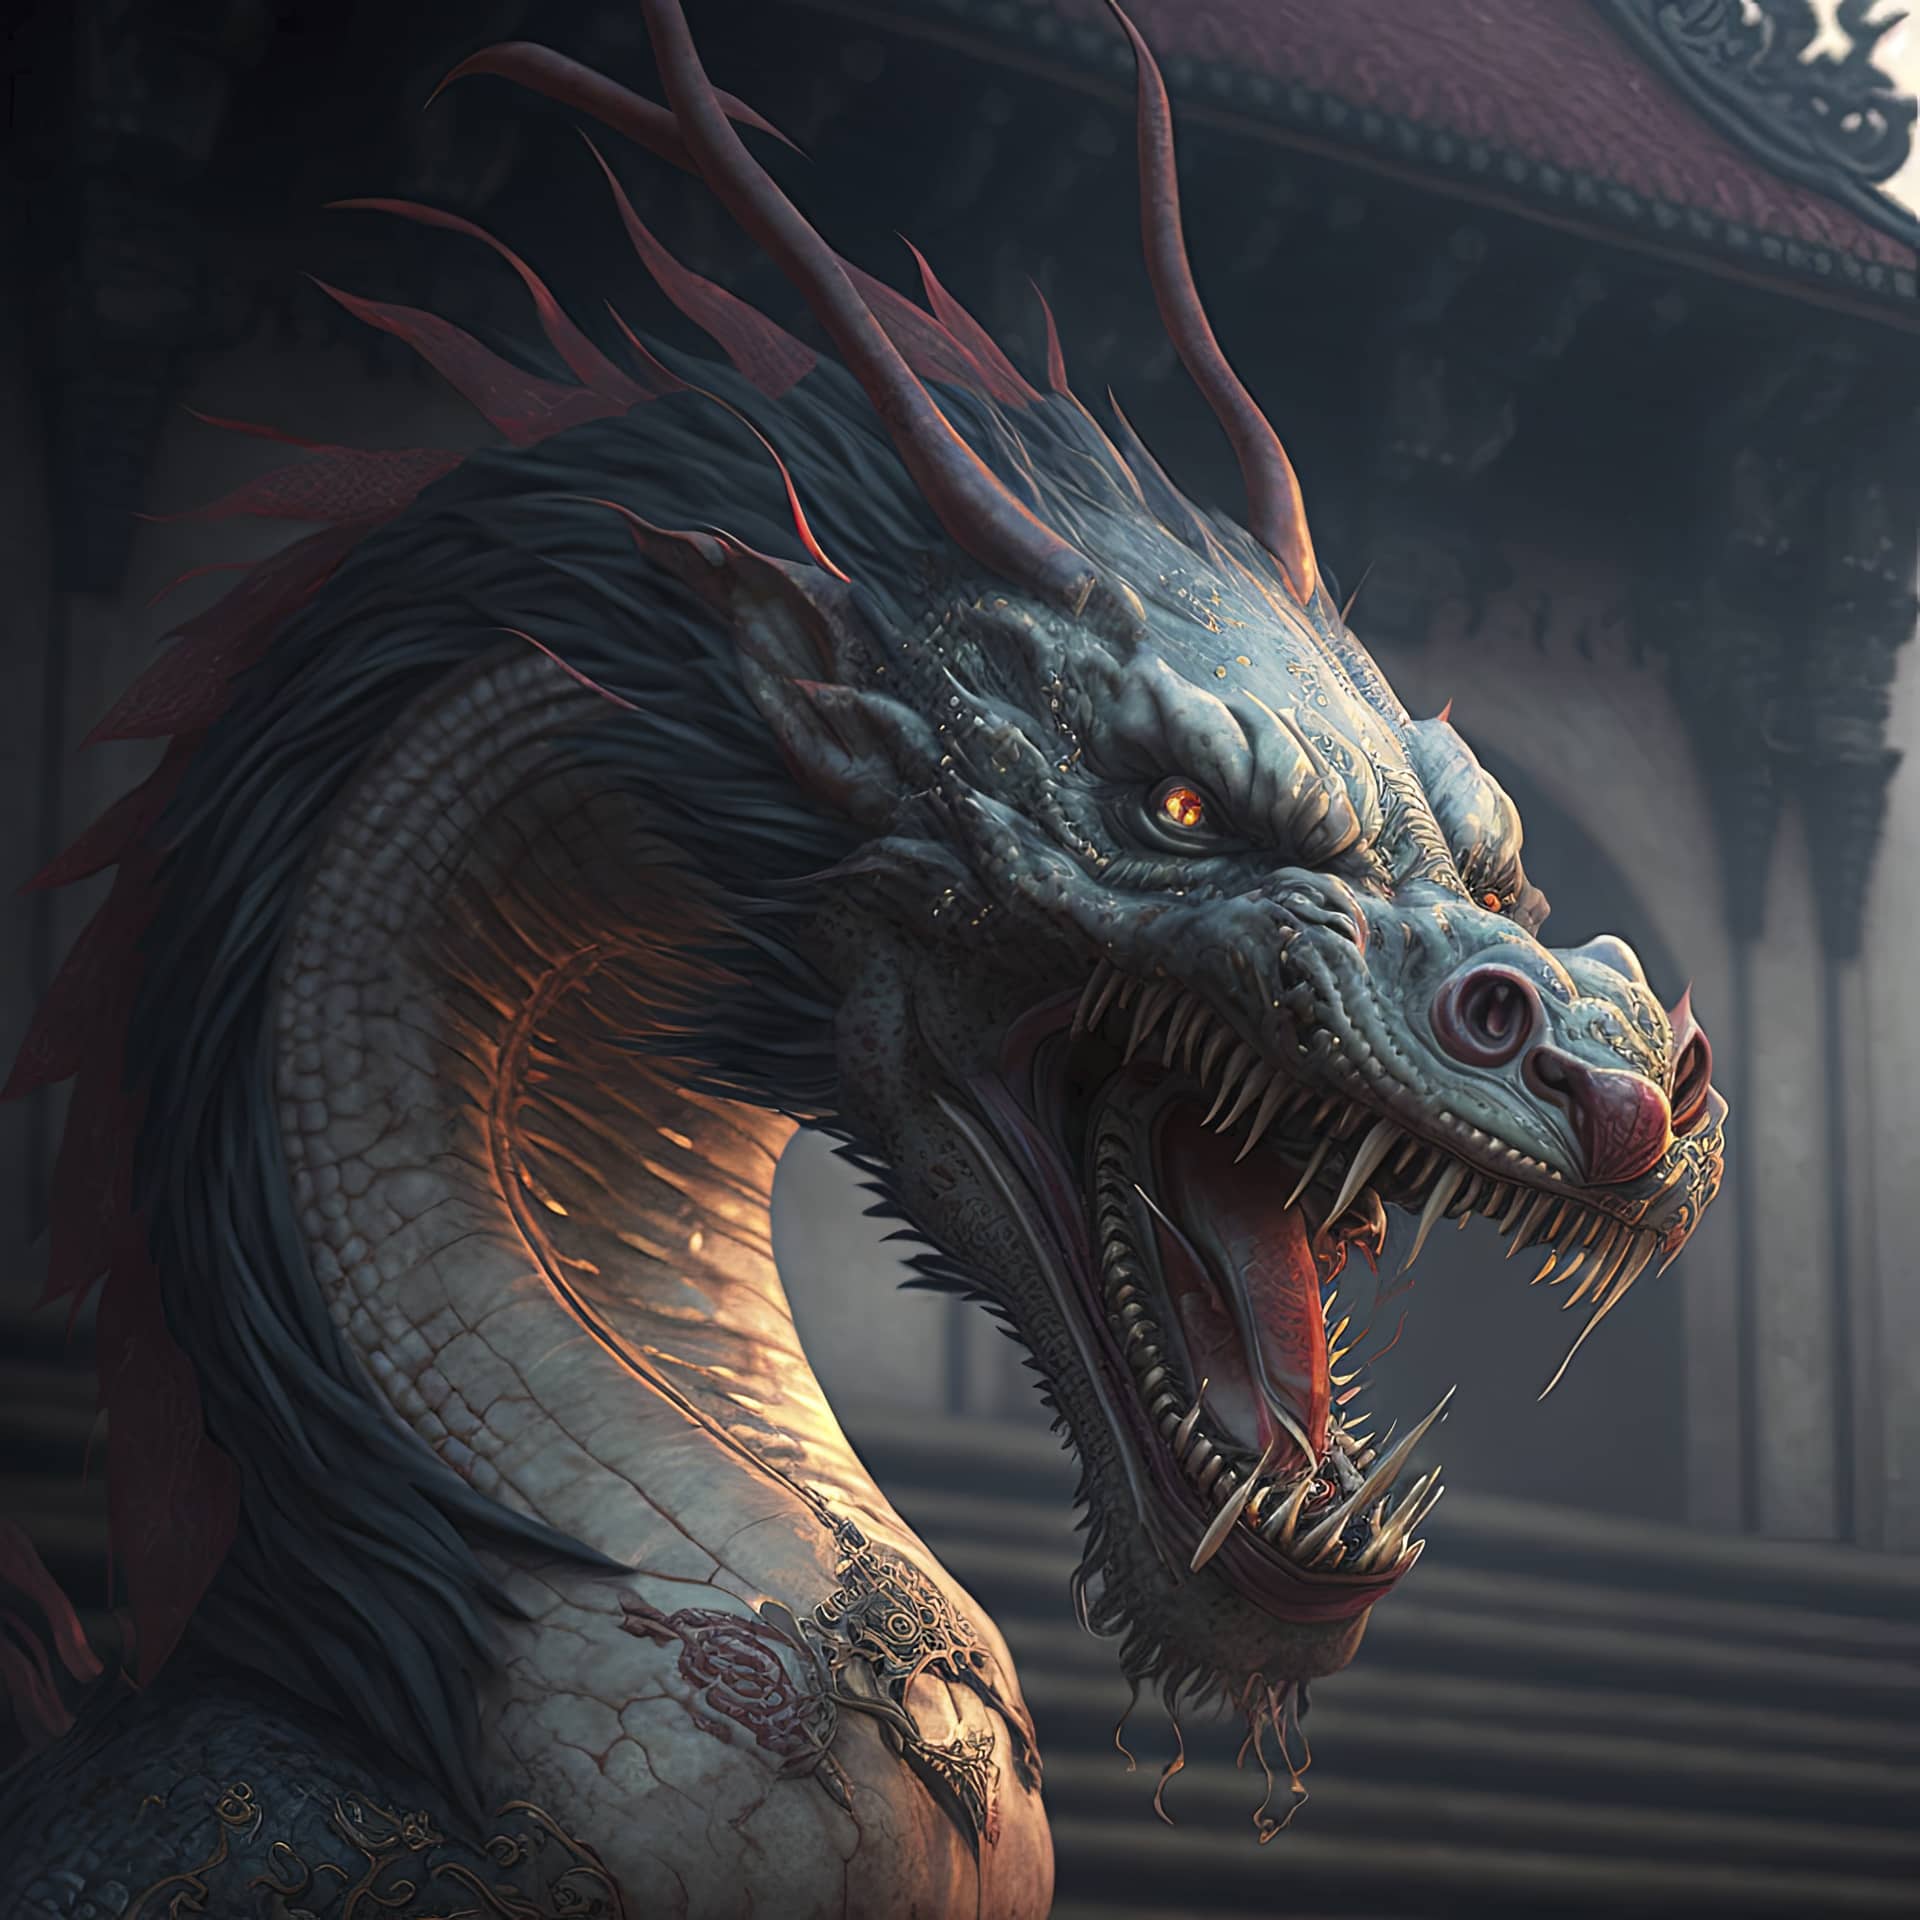 Cool images for profile chinese dragon about attack intruders